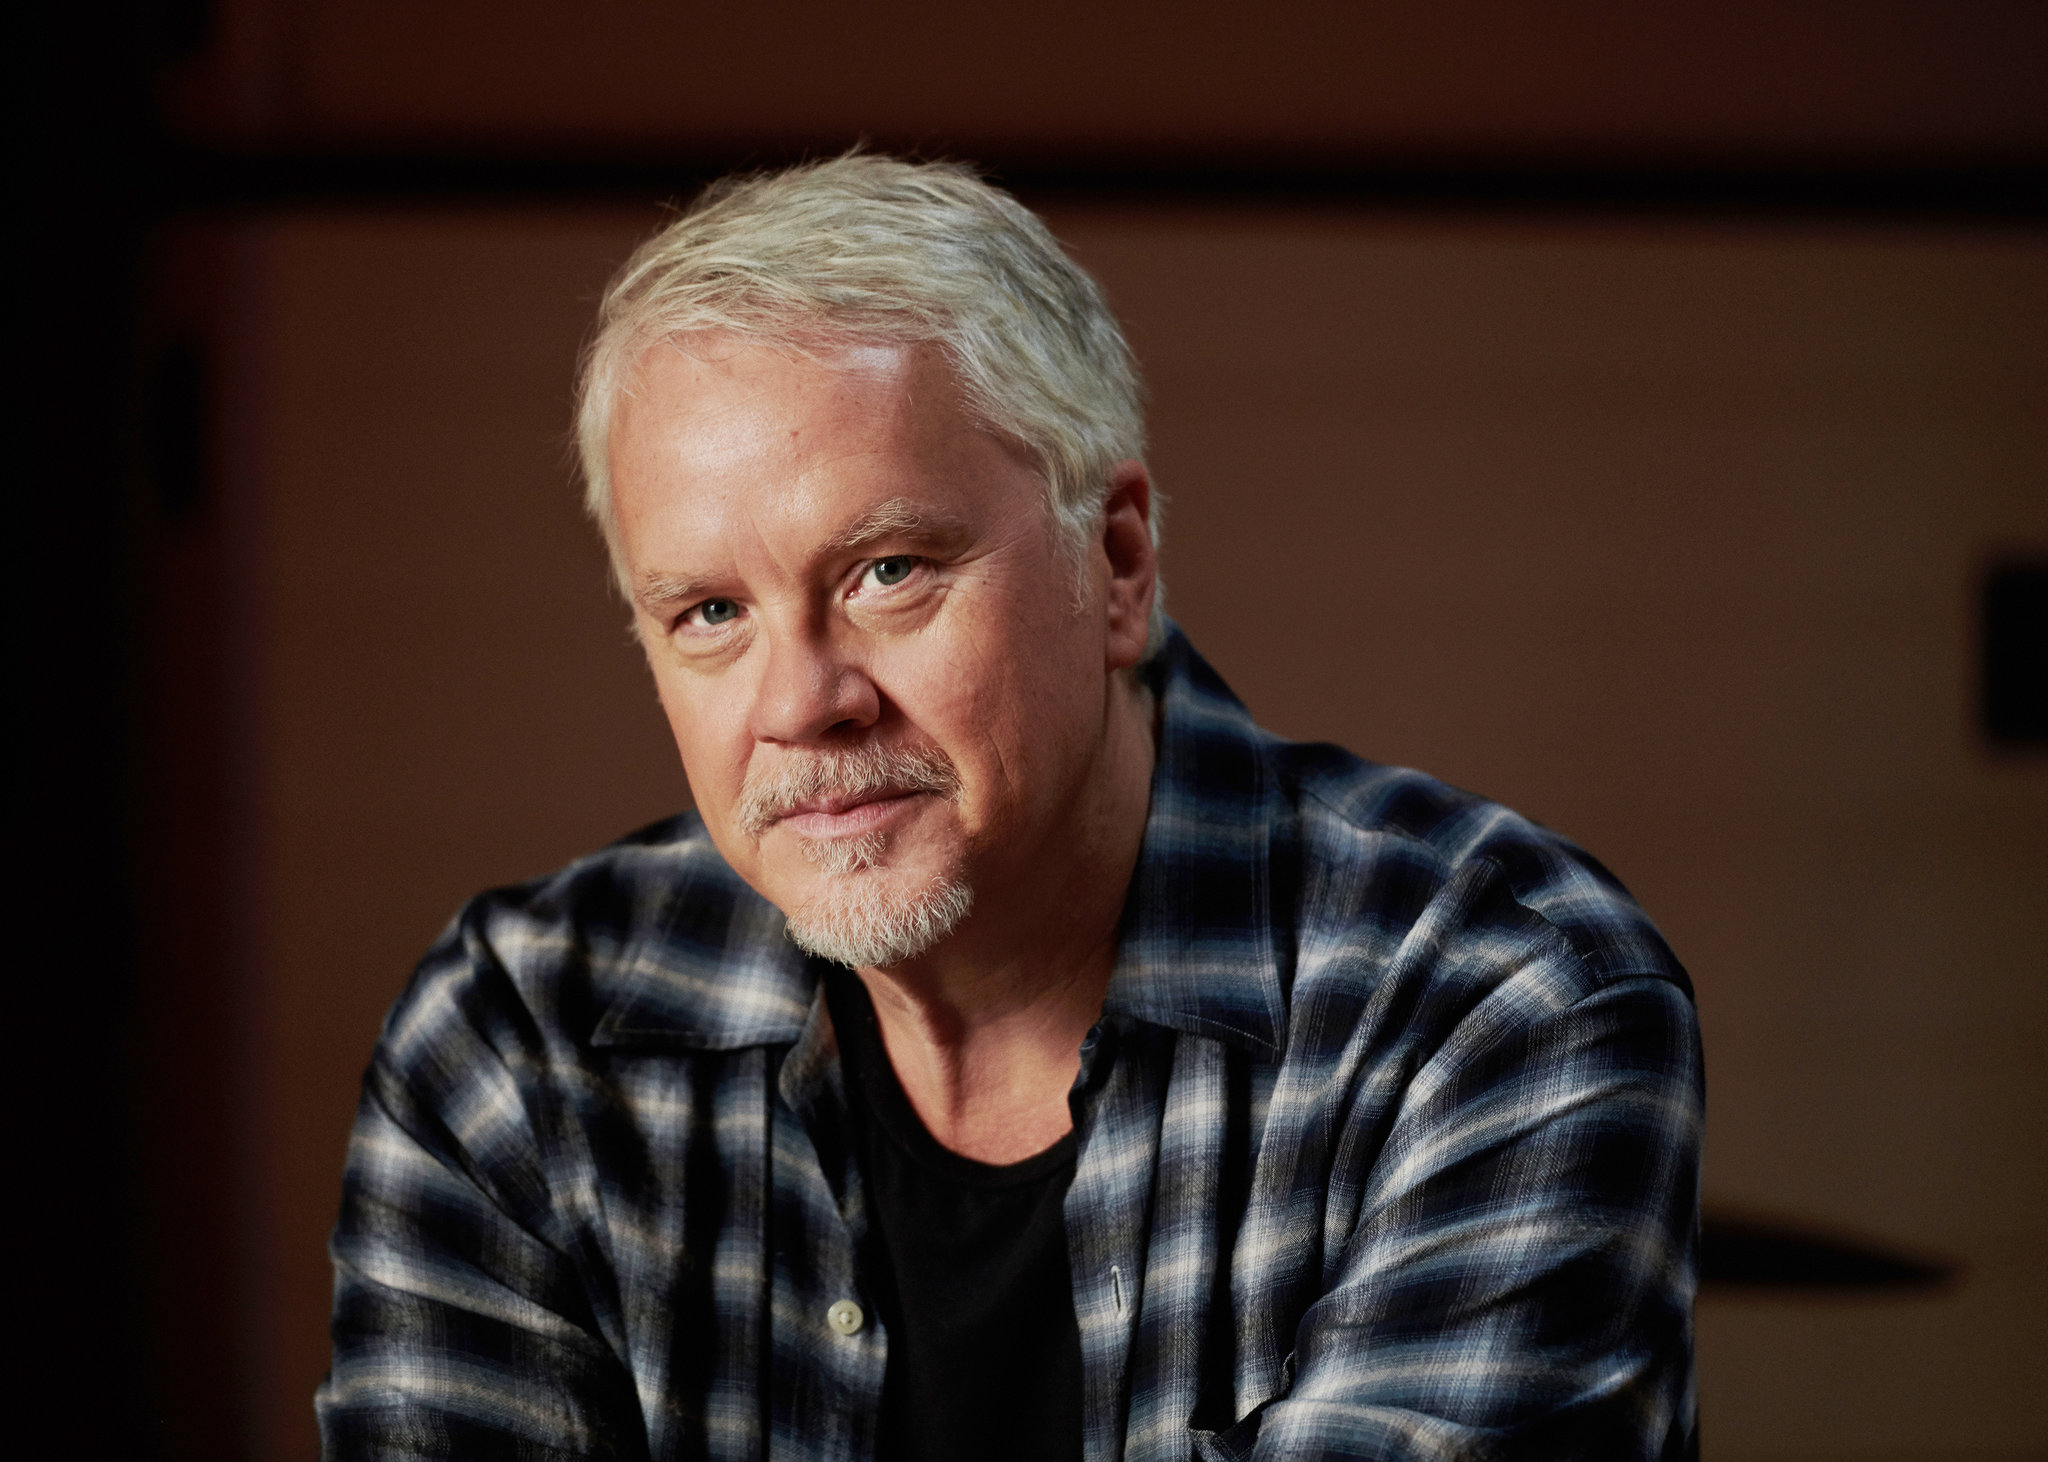 How rich is Tim Robbins?